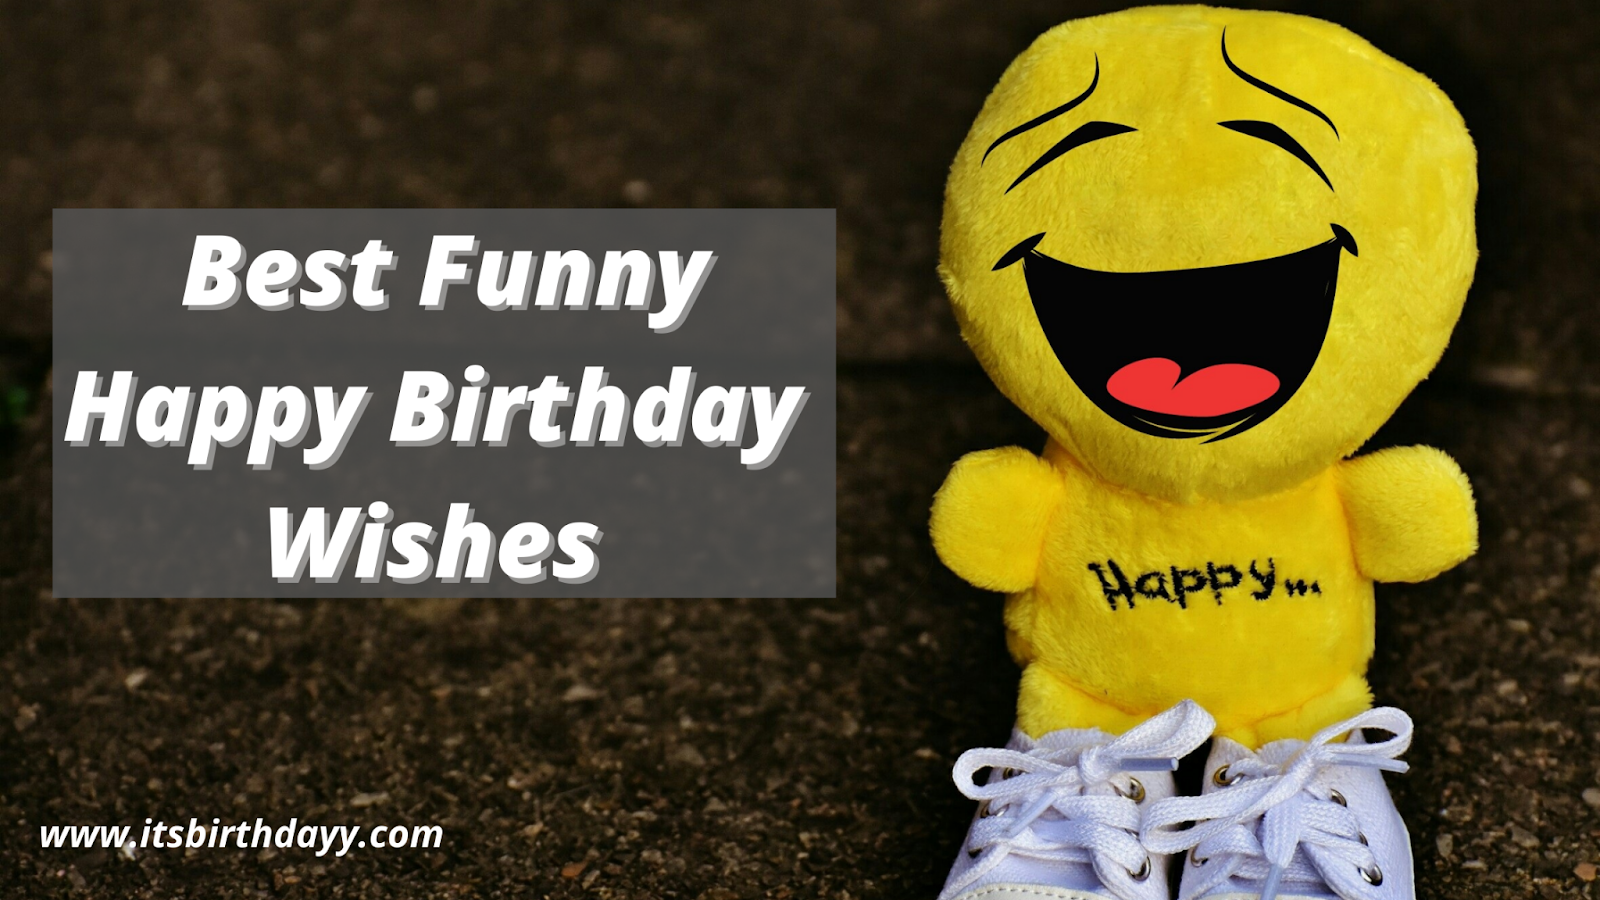 50+ Best Funny Birthday Wishes & Quotes - Its Birthday